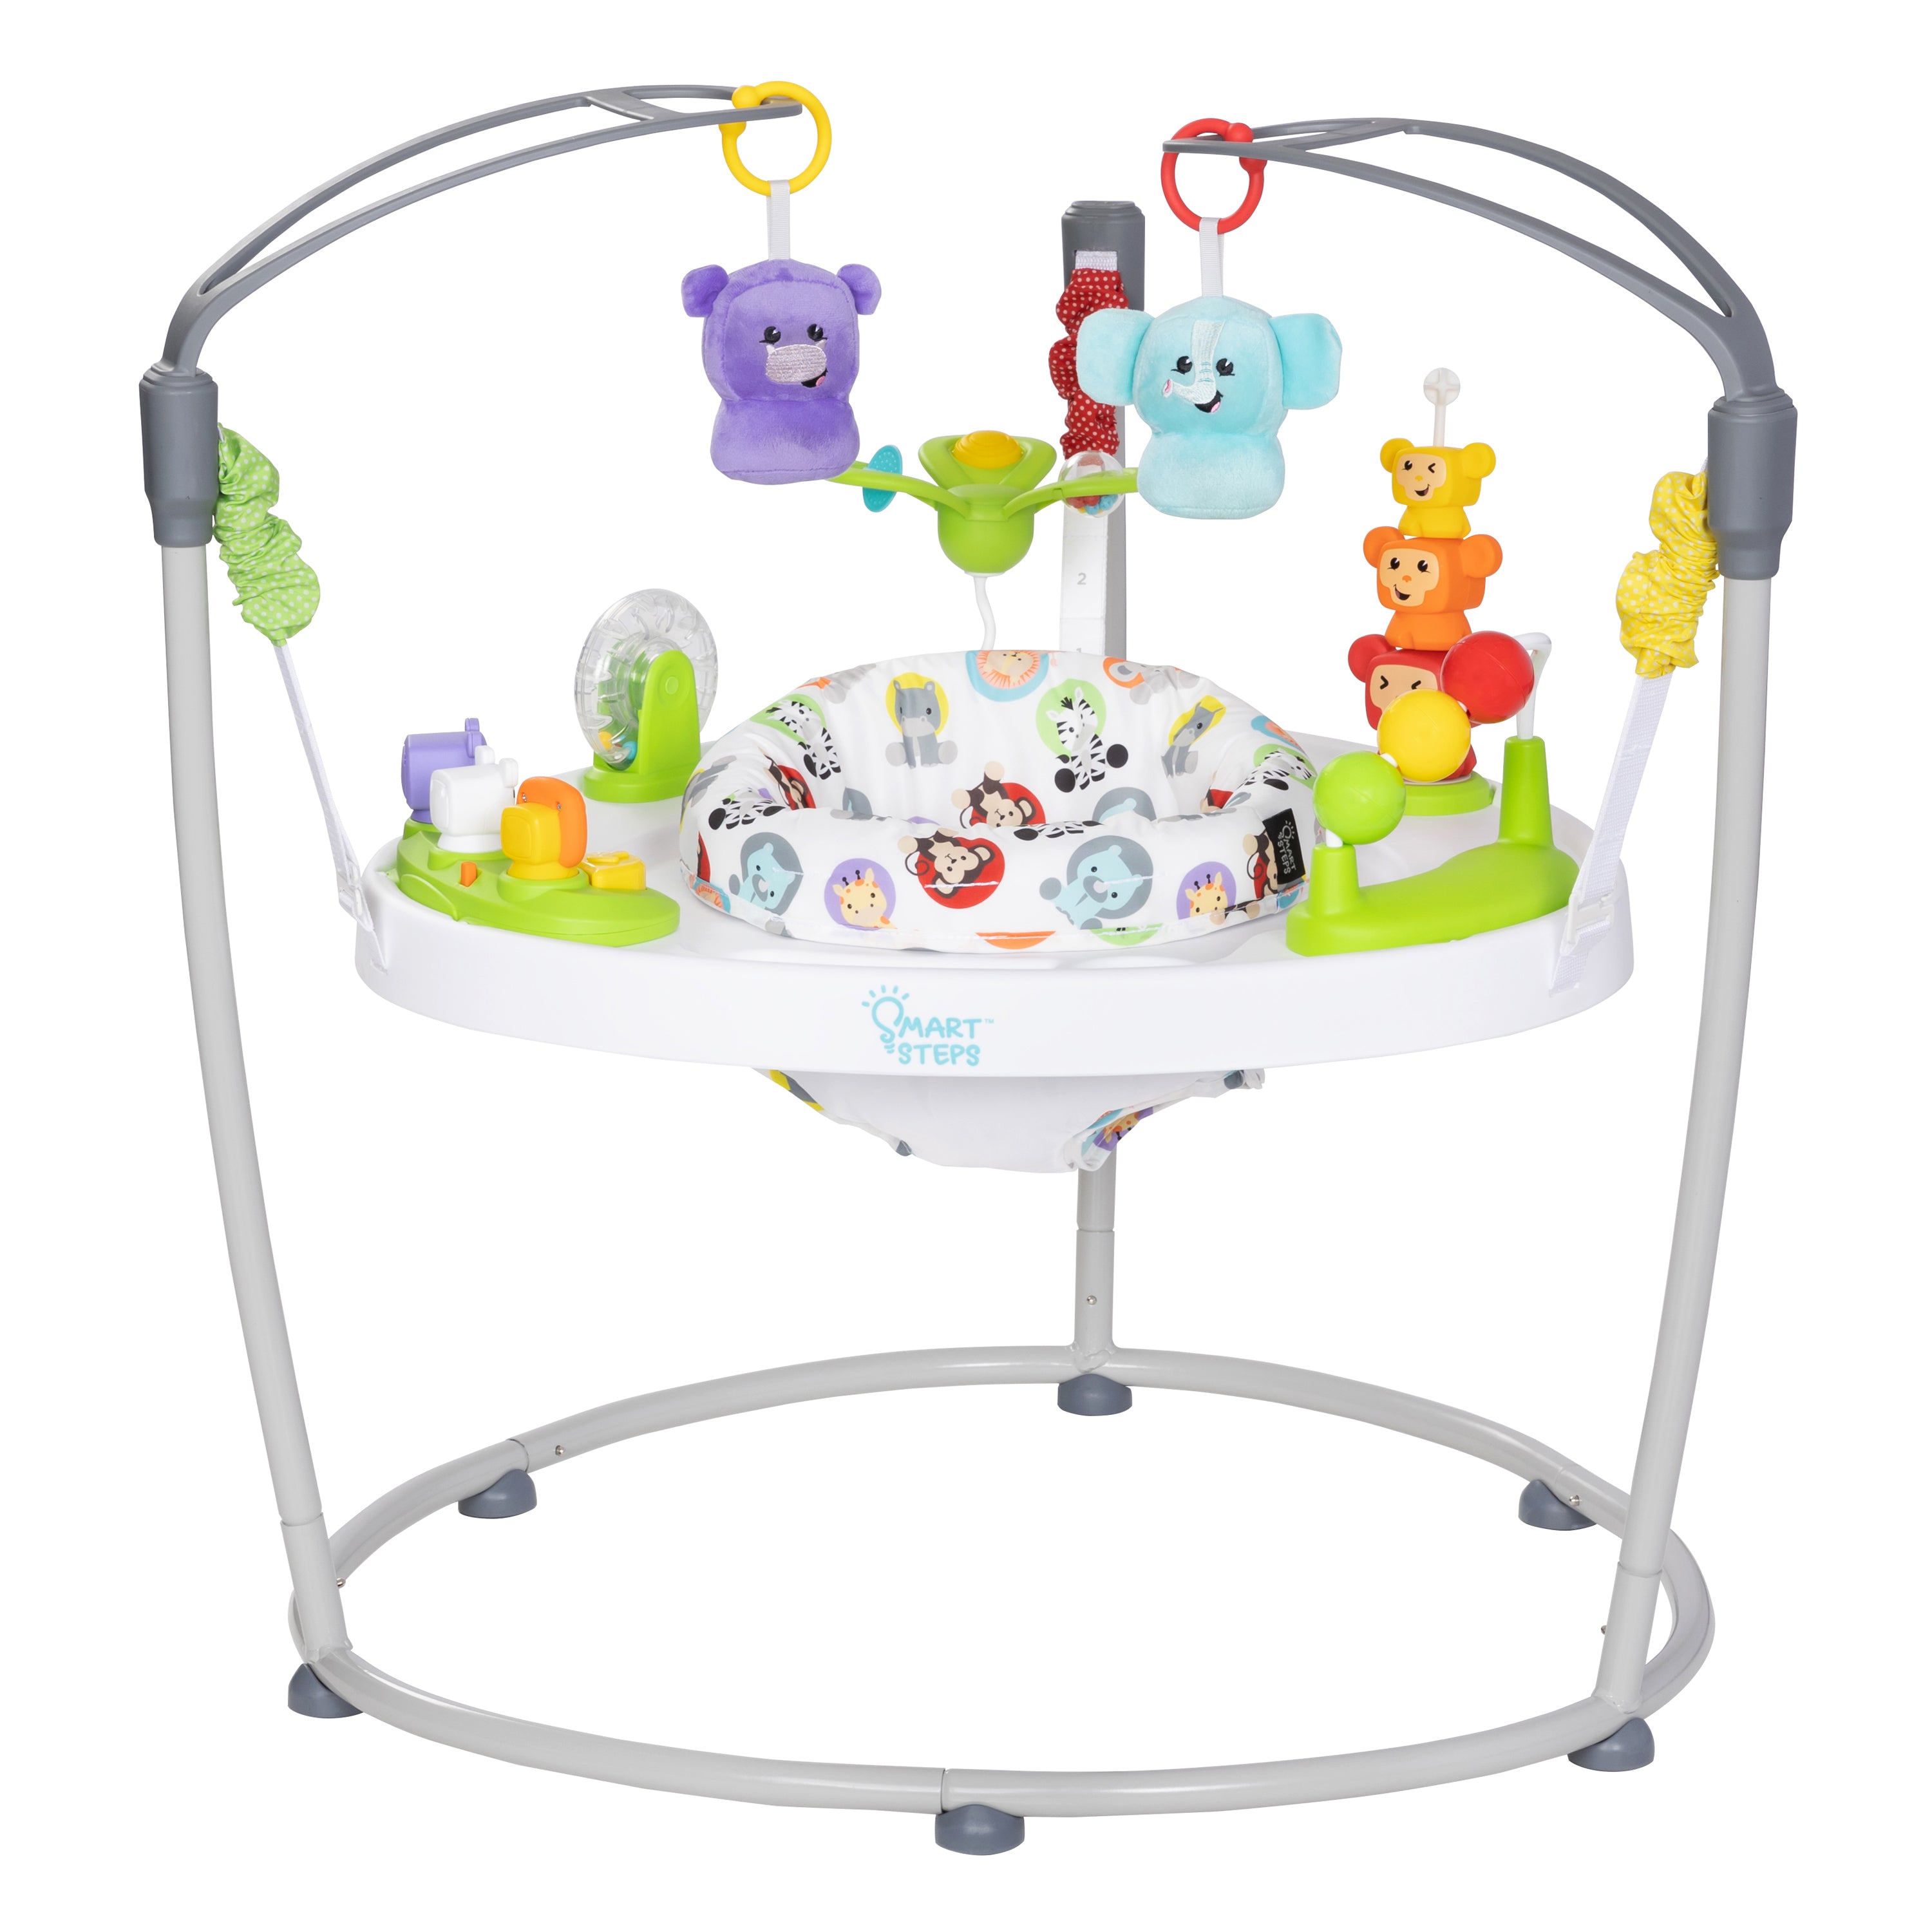  Summer Infant Deluxe SuperSeat®, Wild Safari, Fun Baby Seat  for Sitting Up, Playtime, and Meals, Ages 4 Months to 4 Years, Includes  Booster Seat, Tray, and Toy bar : Baby